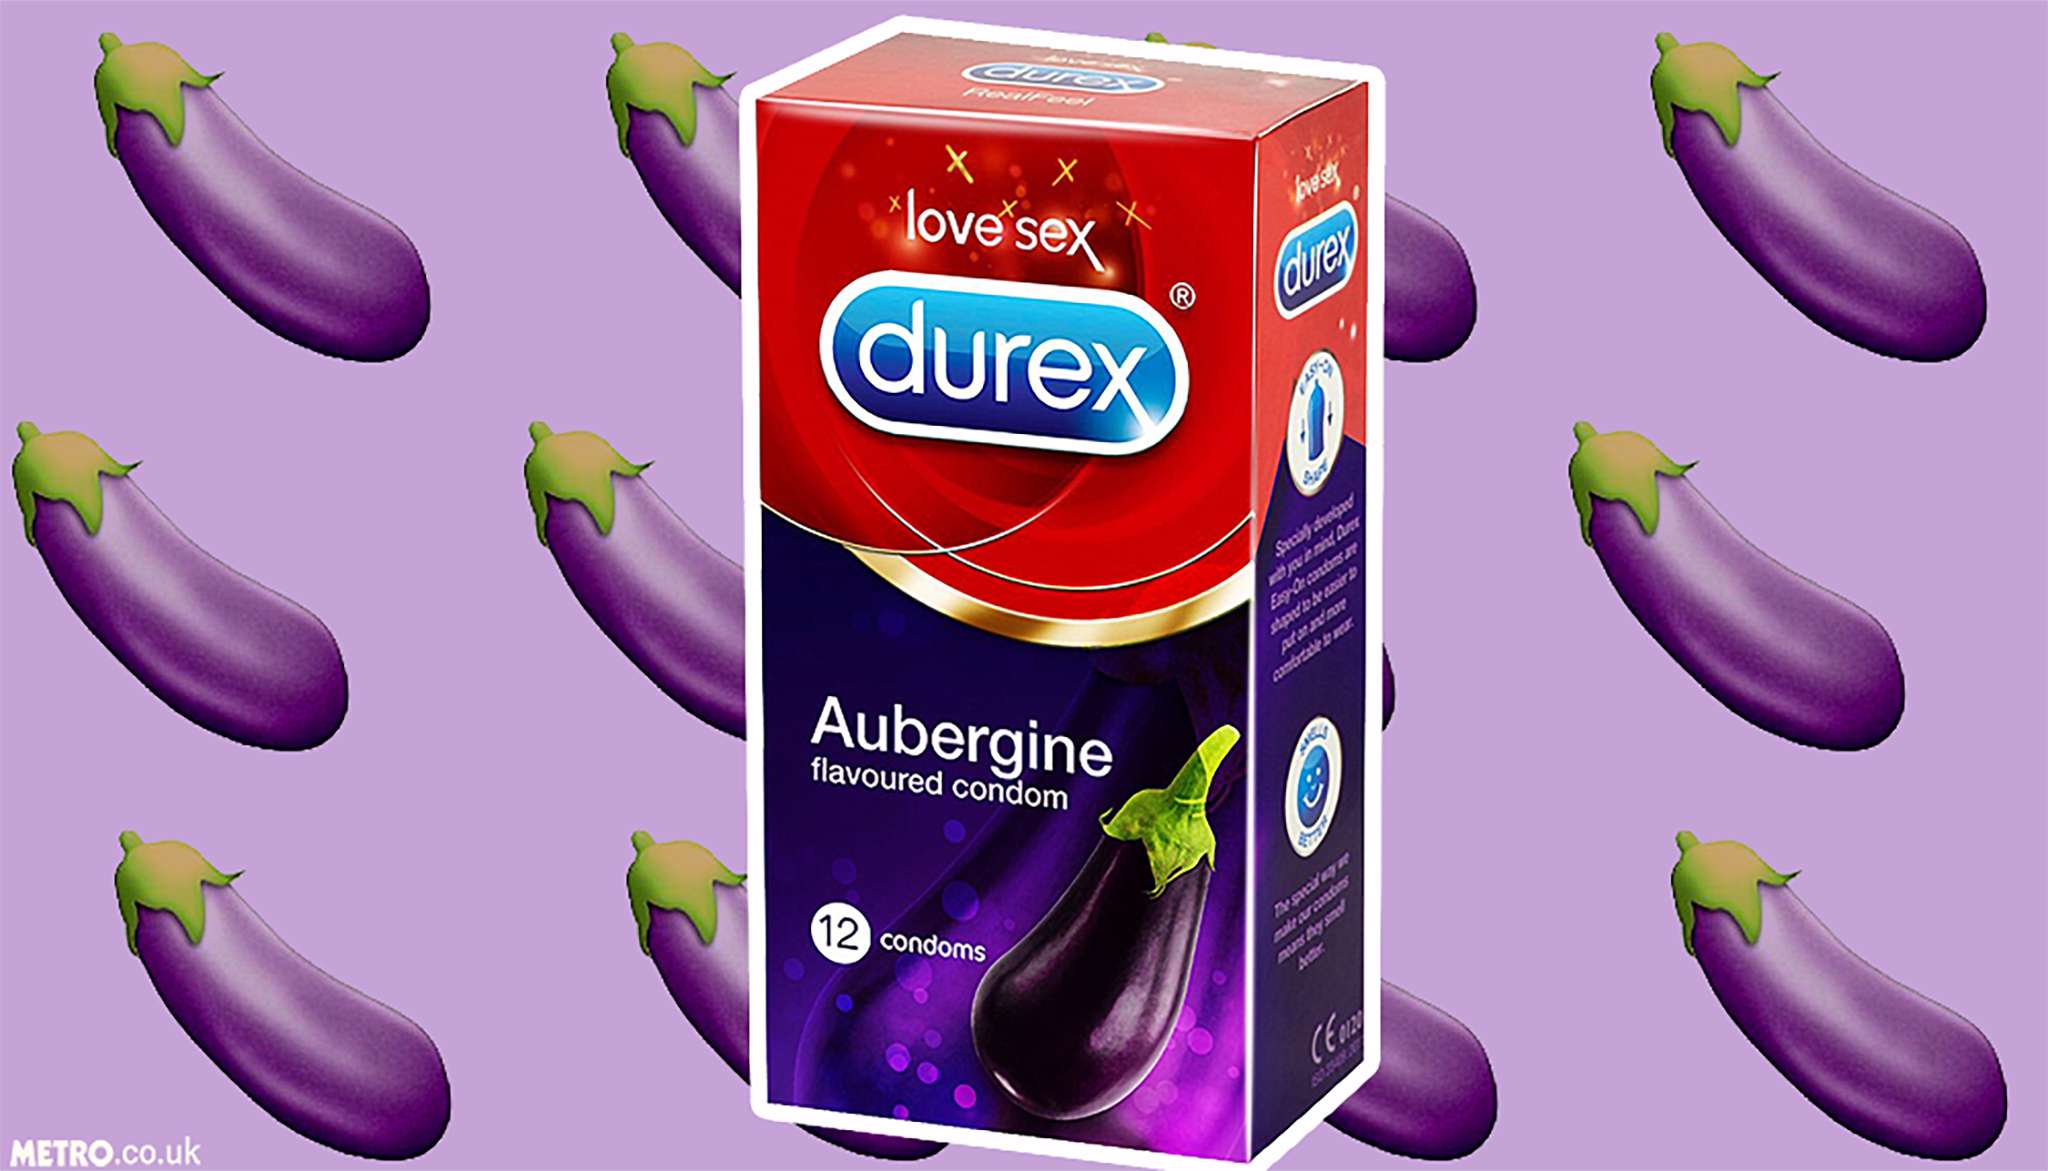 Durex’s announcement of an ‘exciting’ aubergine-flavoured condom. Photo: SCMP Pictures